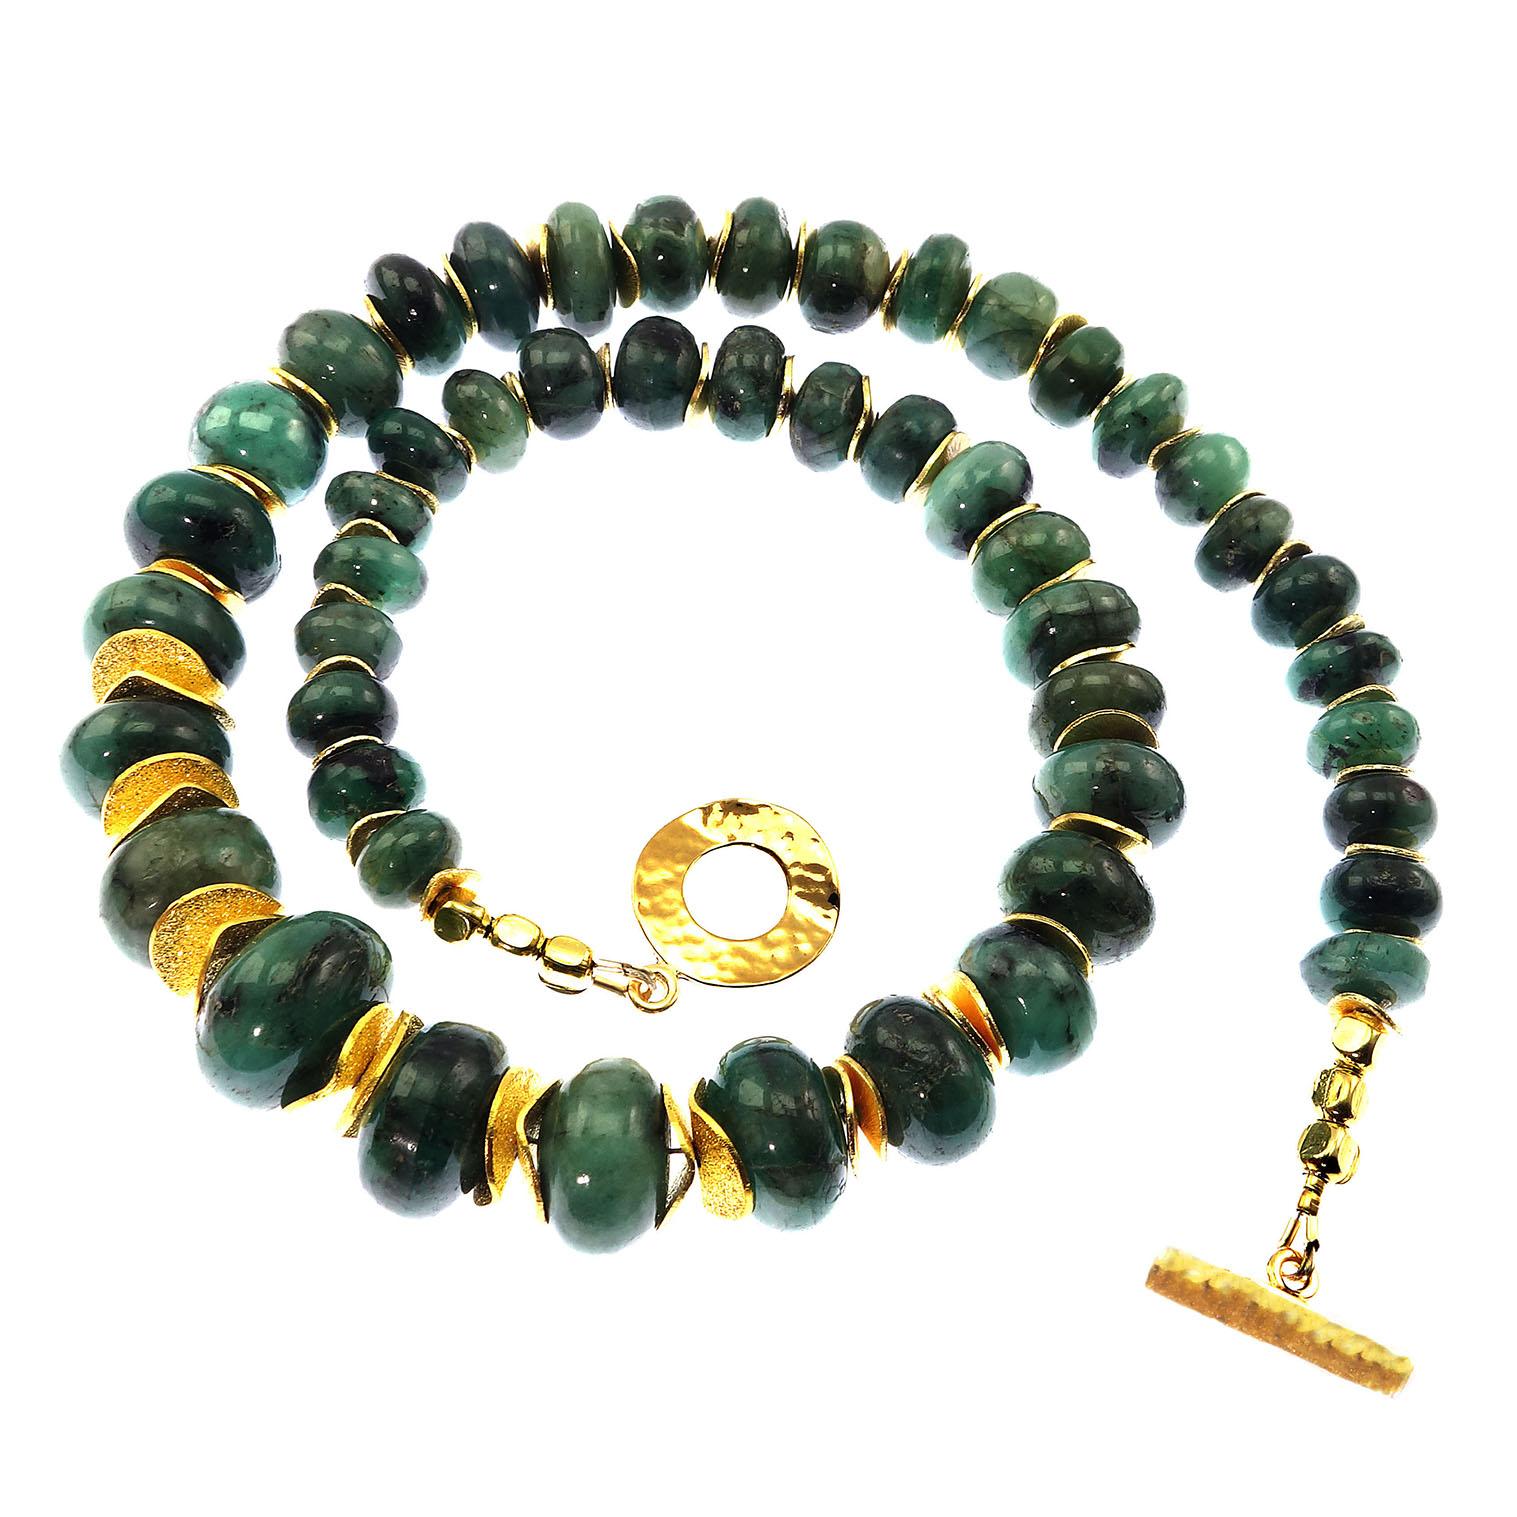  Necklace of Highly Polished Graduated  Green Emerald Rondels with Gold Accents 3